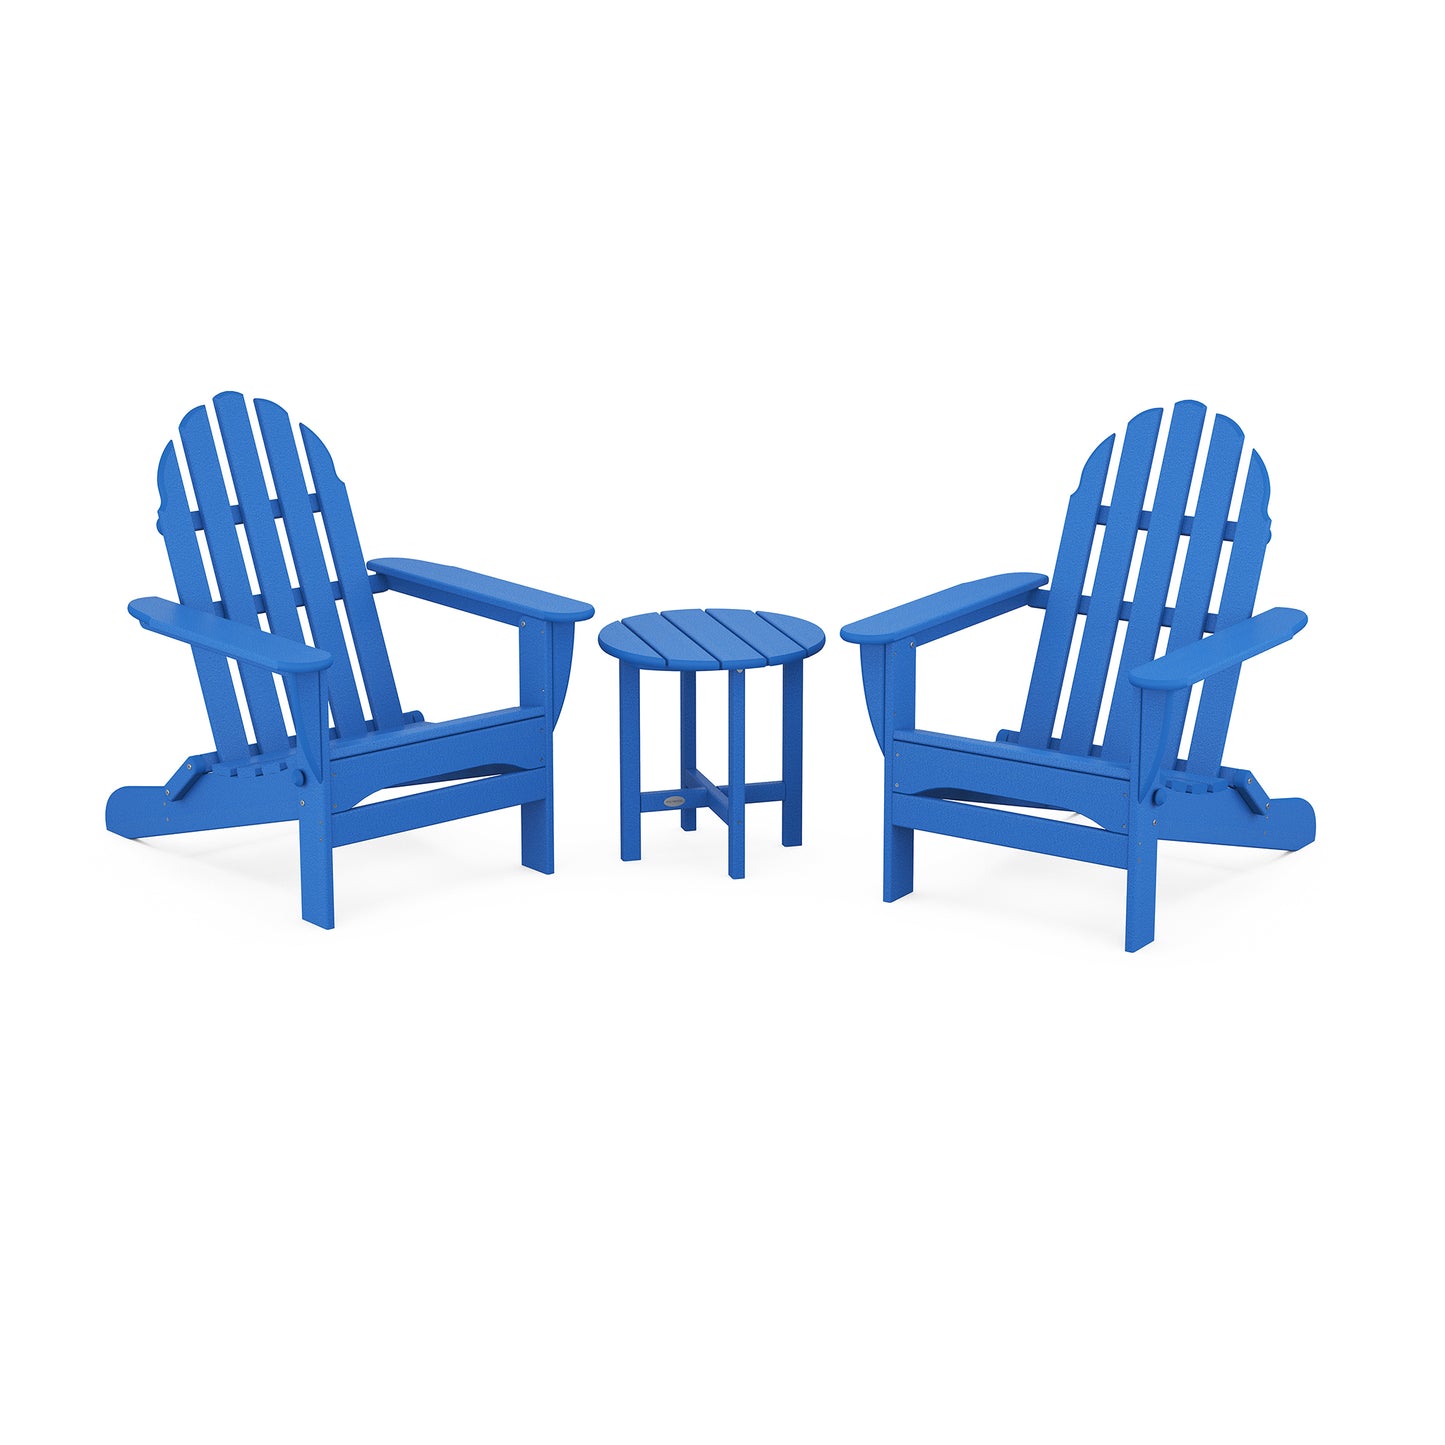 Two blue POLYWOOD Classic Folding Adirondack 3-Piece Sets facing each other with a small round table between them, isolated on a white background.